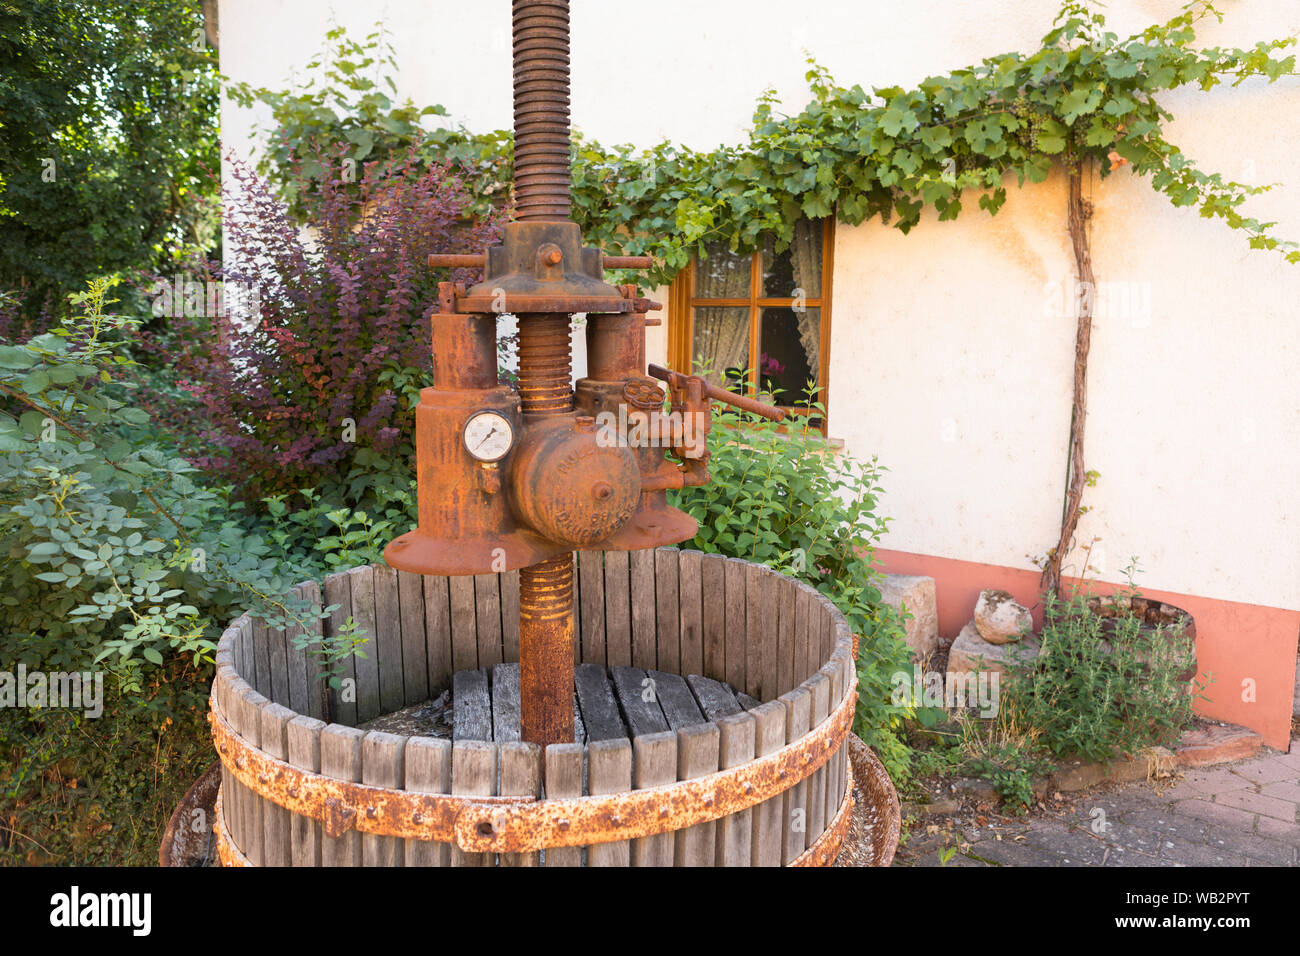 Vintage wine press used as decoration at front garden in a typical wine area, Rhine Valley, Nierstein, Germany Stock Photo